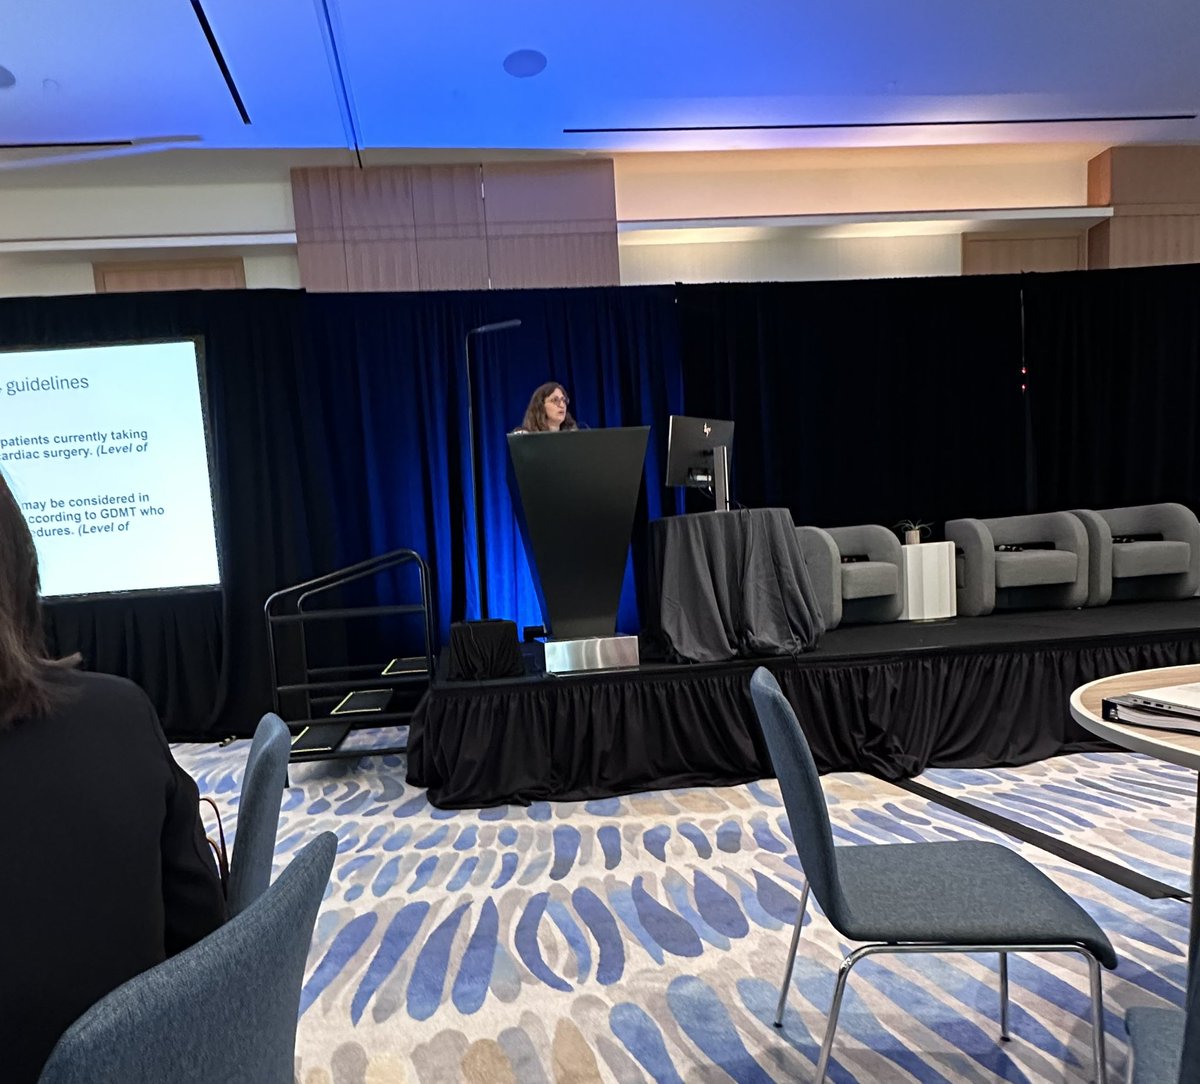 The Preop (POE) Clinic (FL) team kicked off the NP/PA Surgical Update Conf. Thank you Drs. Irizarry, Malavet, Mitri and Smith and Mrs. Irizarry and Pitruzzello for their enlightening presentations. @MayoGIMFL @SPAQIedu @MayoAnesthesia